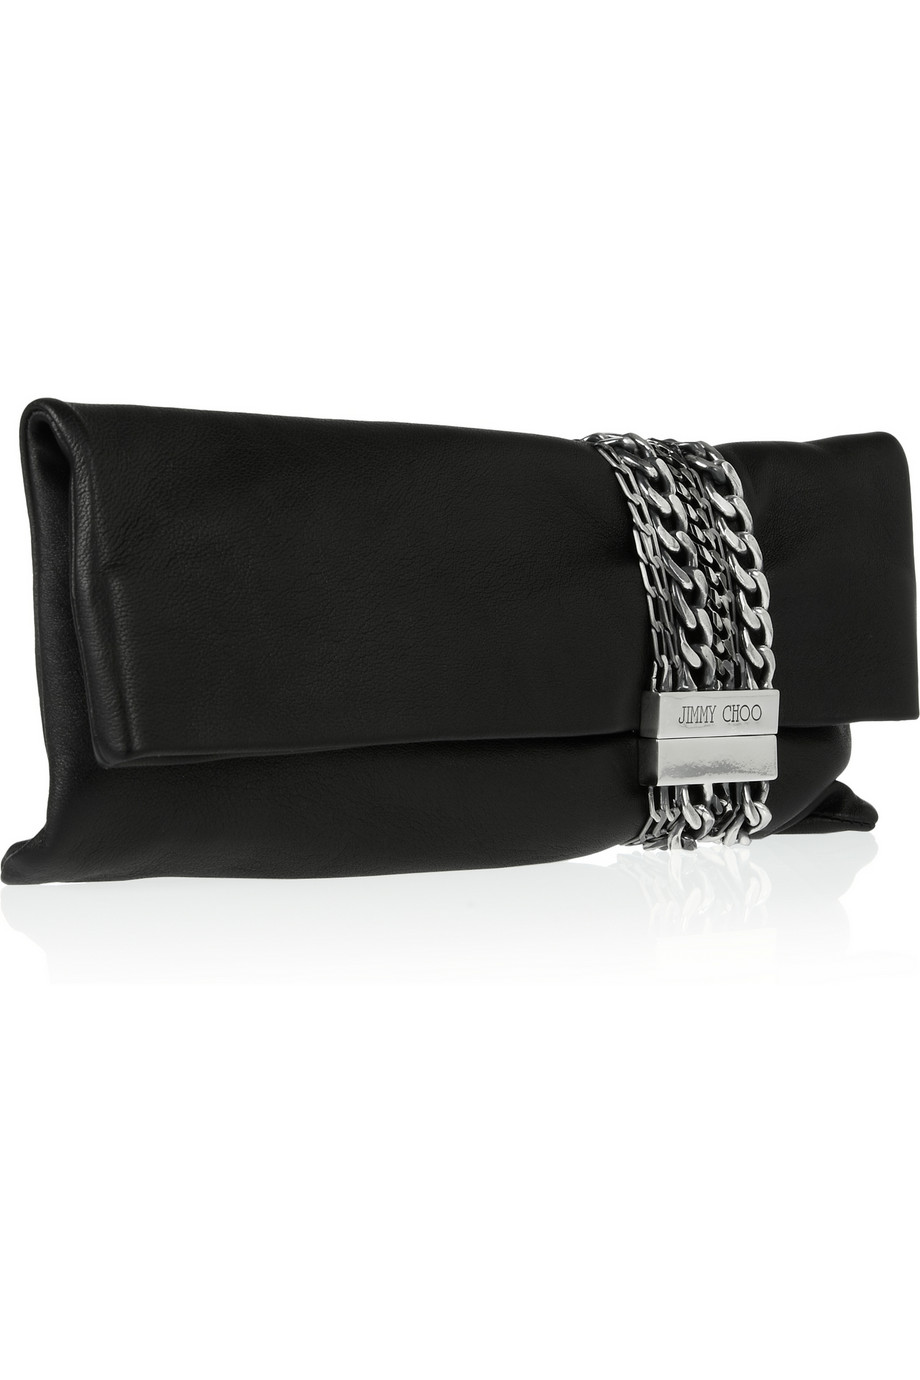 Lyst - Jimmy Choo Chandra Chainembellished Leather Clutch in Black